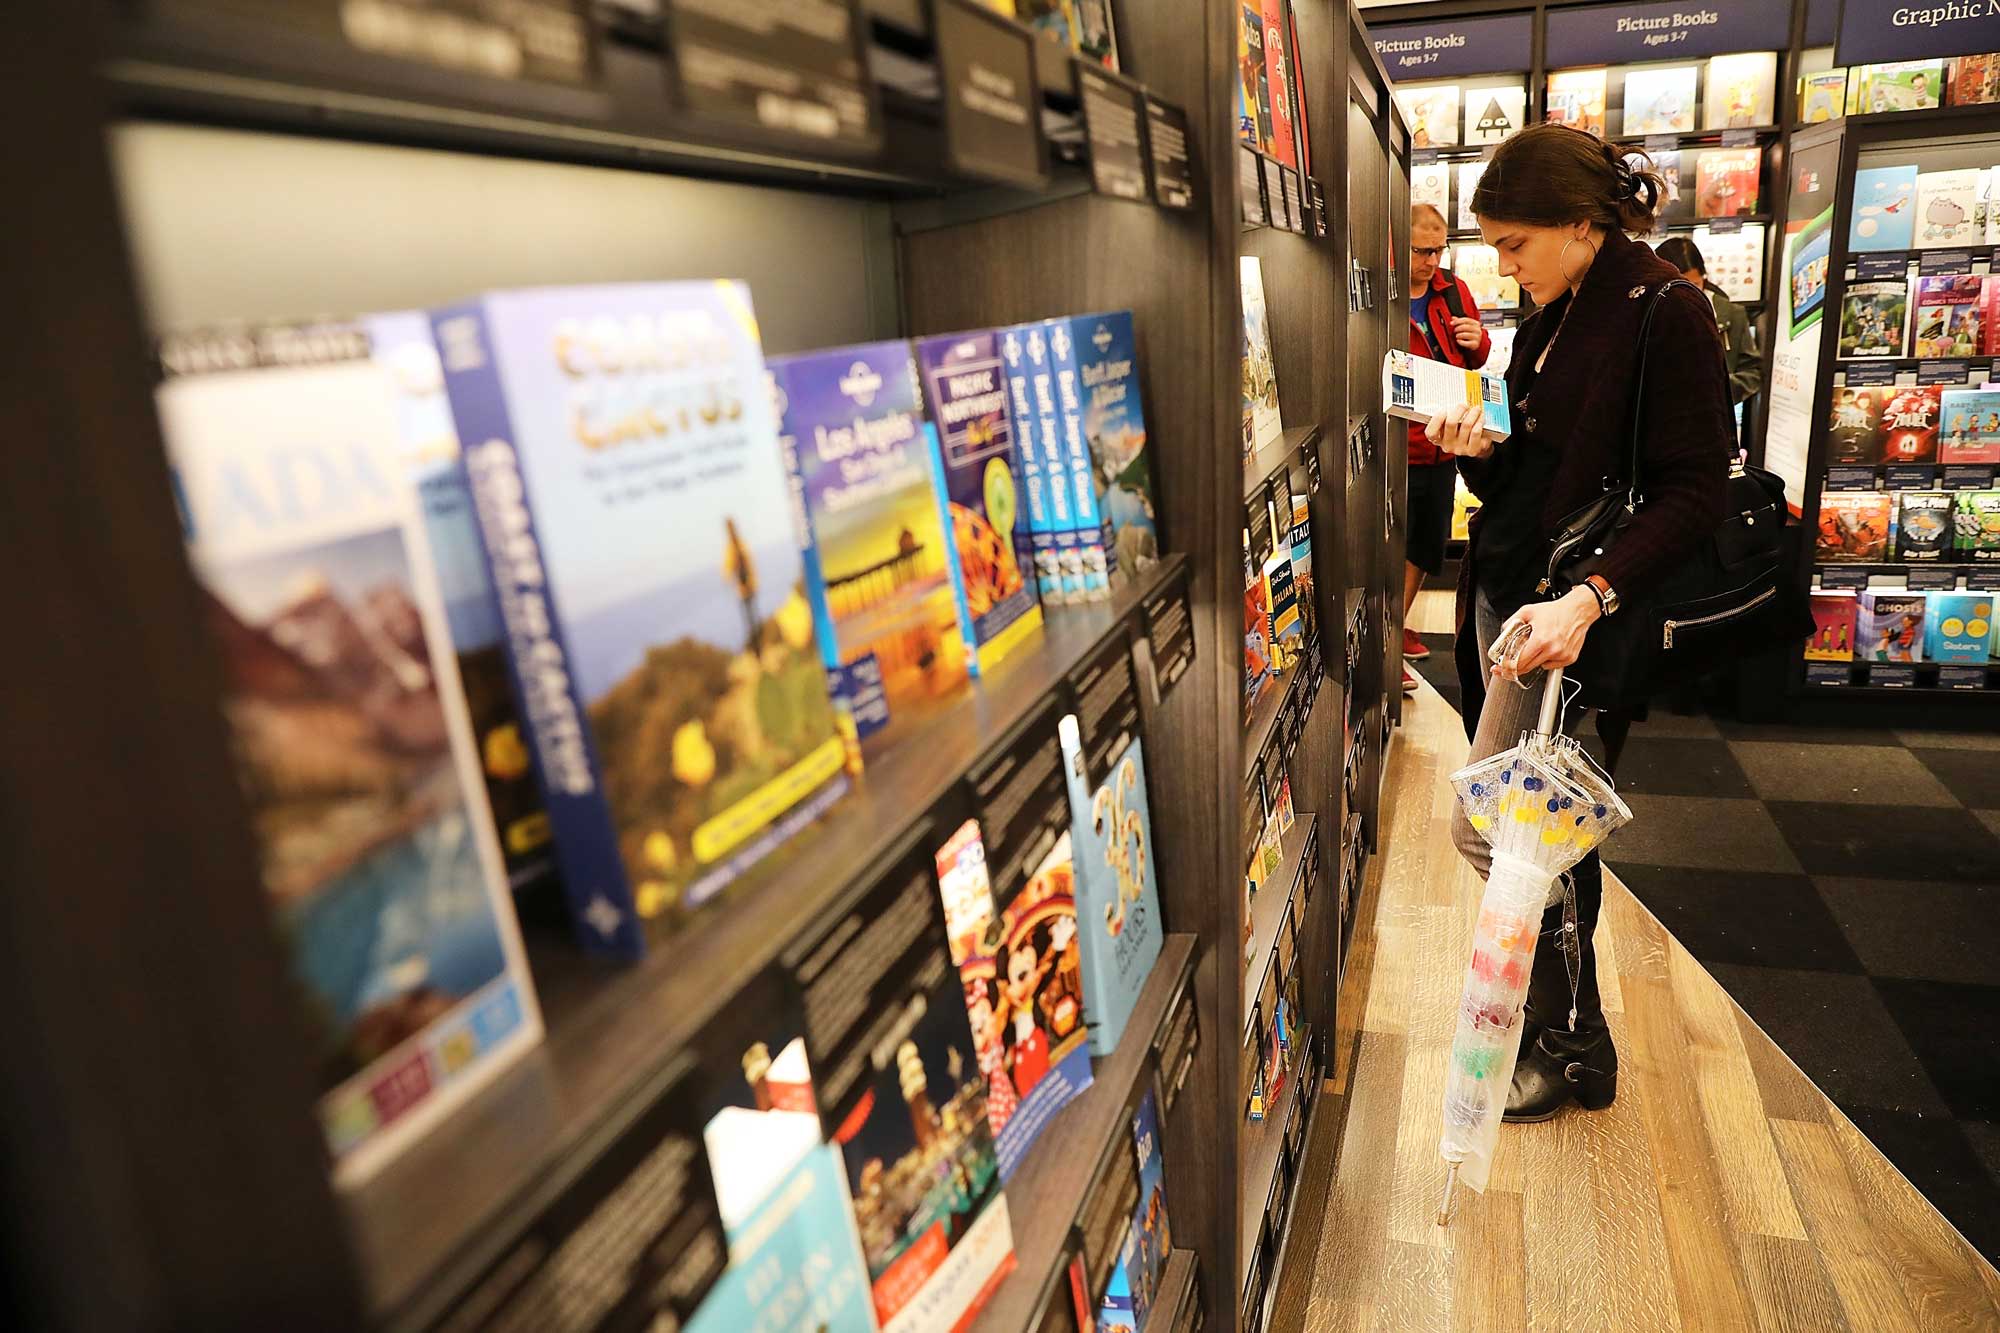 Amazon is shutting 68 retail stores, ending Amazon Books, 4-star and Pop Up shops